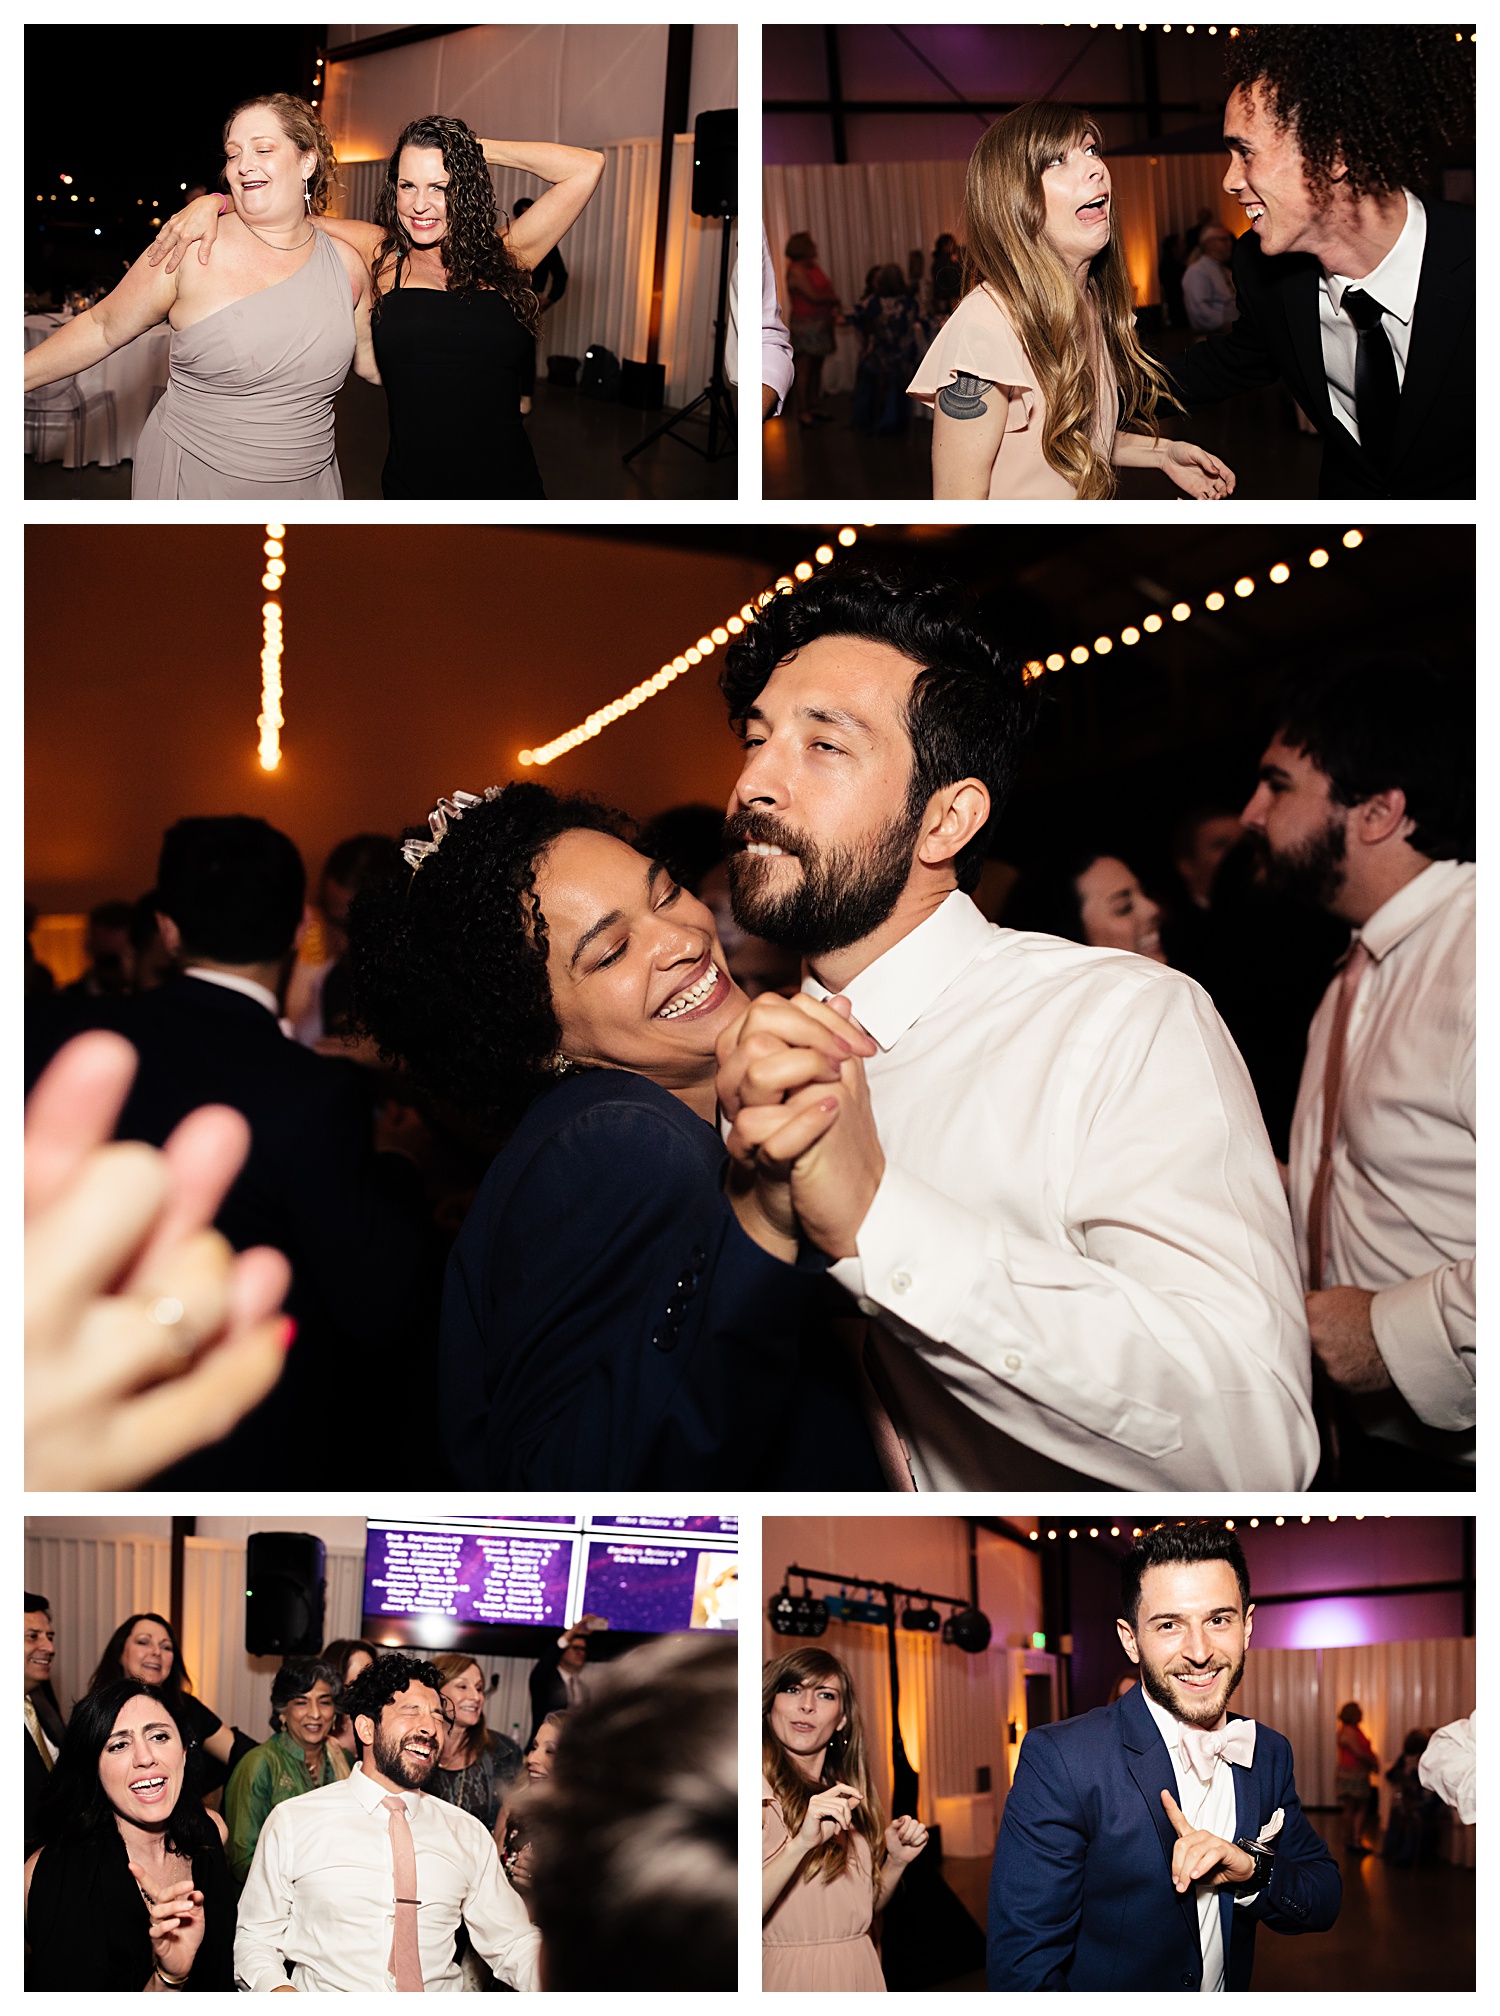 dance party at wedding